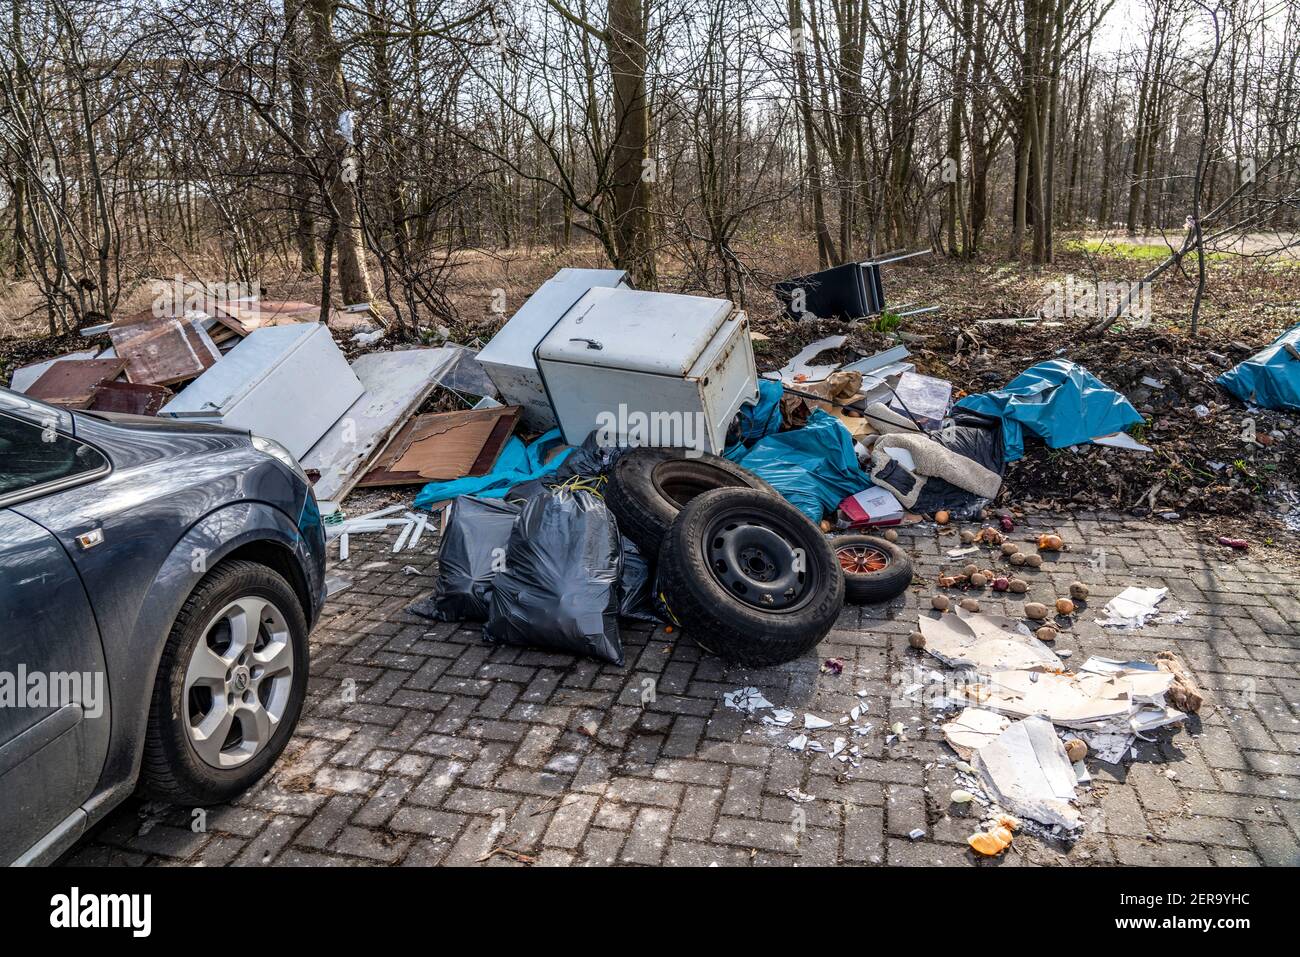 Illegal waste disposal in a car park, at a wooded area, tyres, furniture, refrigerators, household waste, oil cans, Oberhausen NRW, Germany, Stock Photo